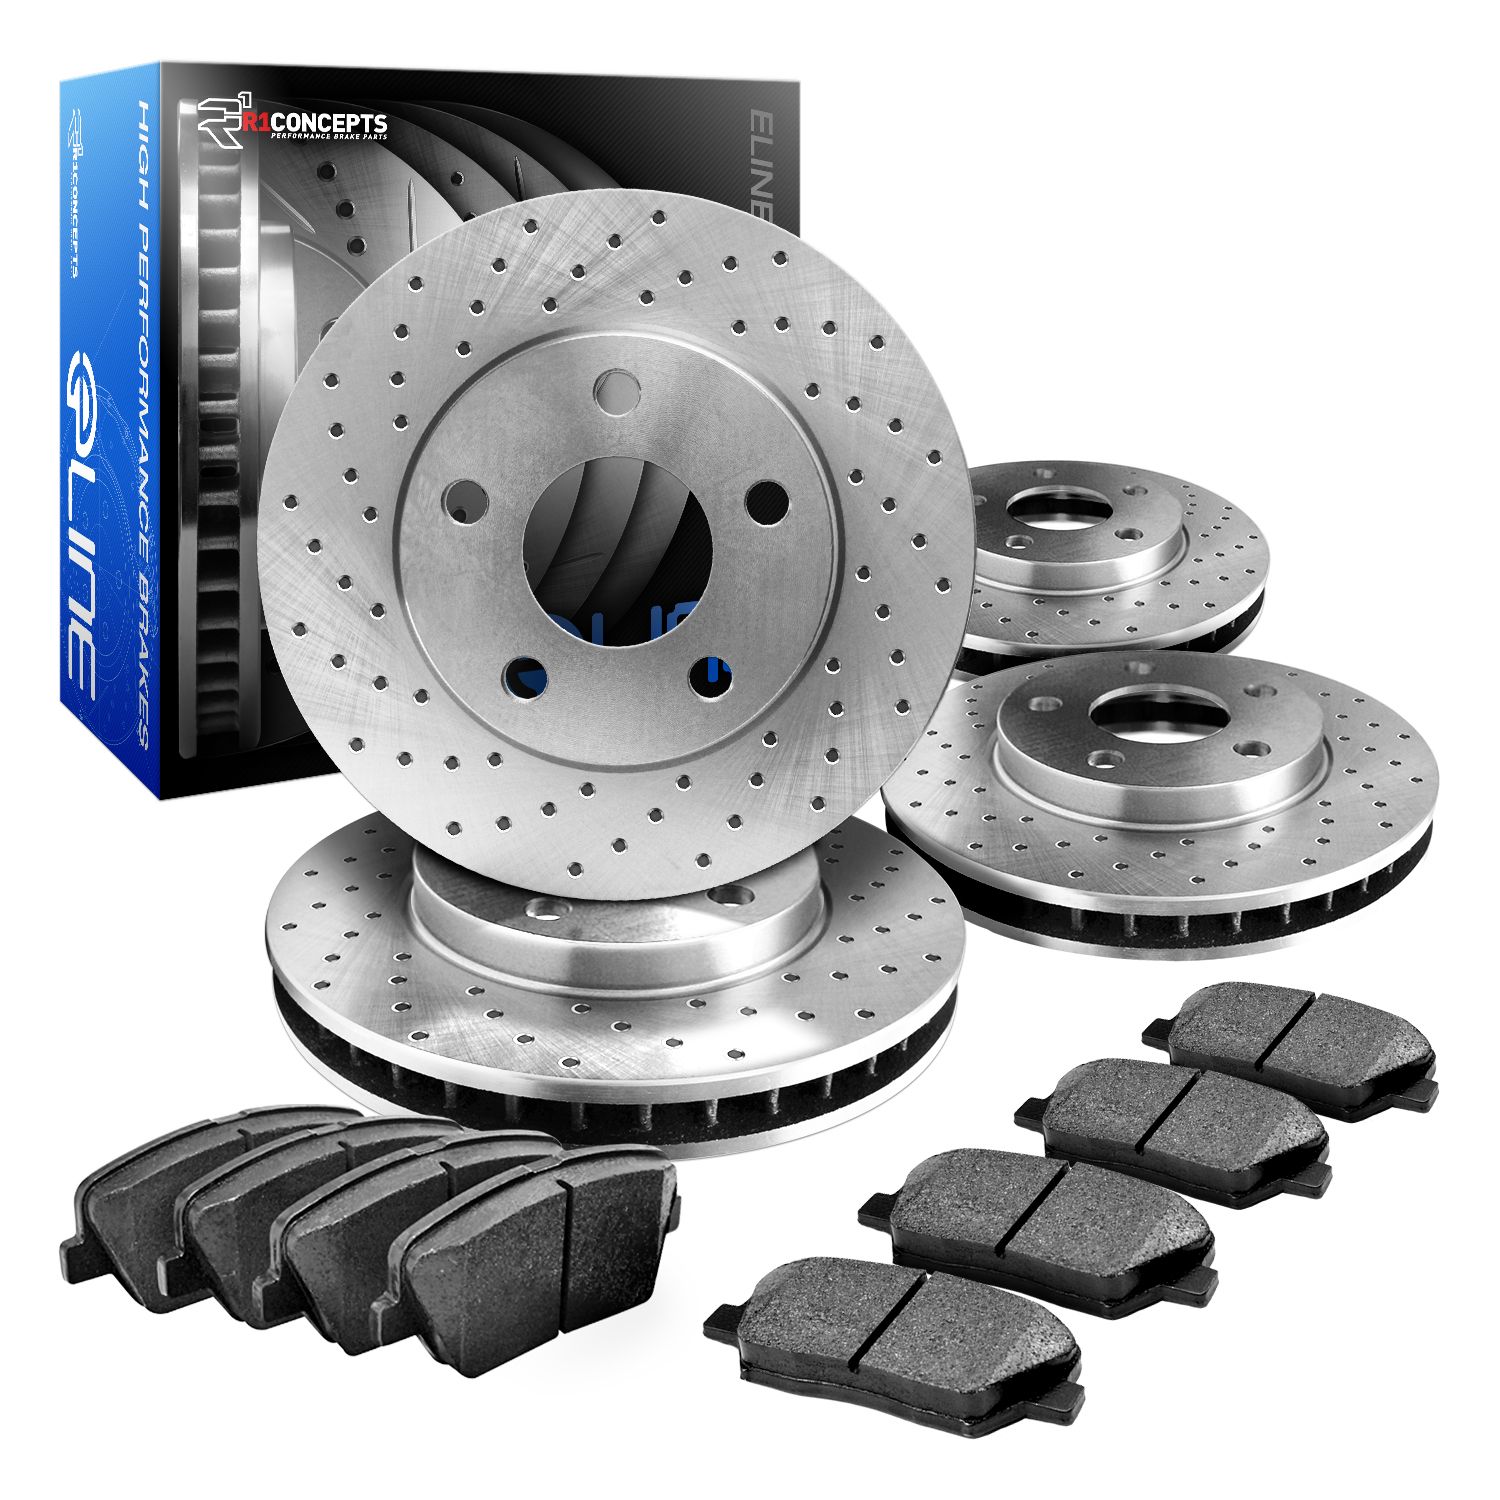 Eline 1999-2003 Ford F-350 Super Duty Pickup XLT 7.3L  Front And Rear Cross Drilled Brake Rotors + Ceramic Pads